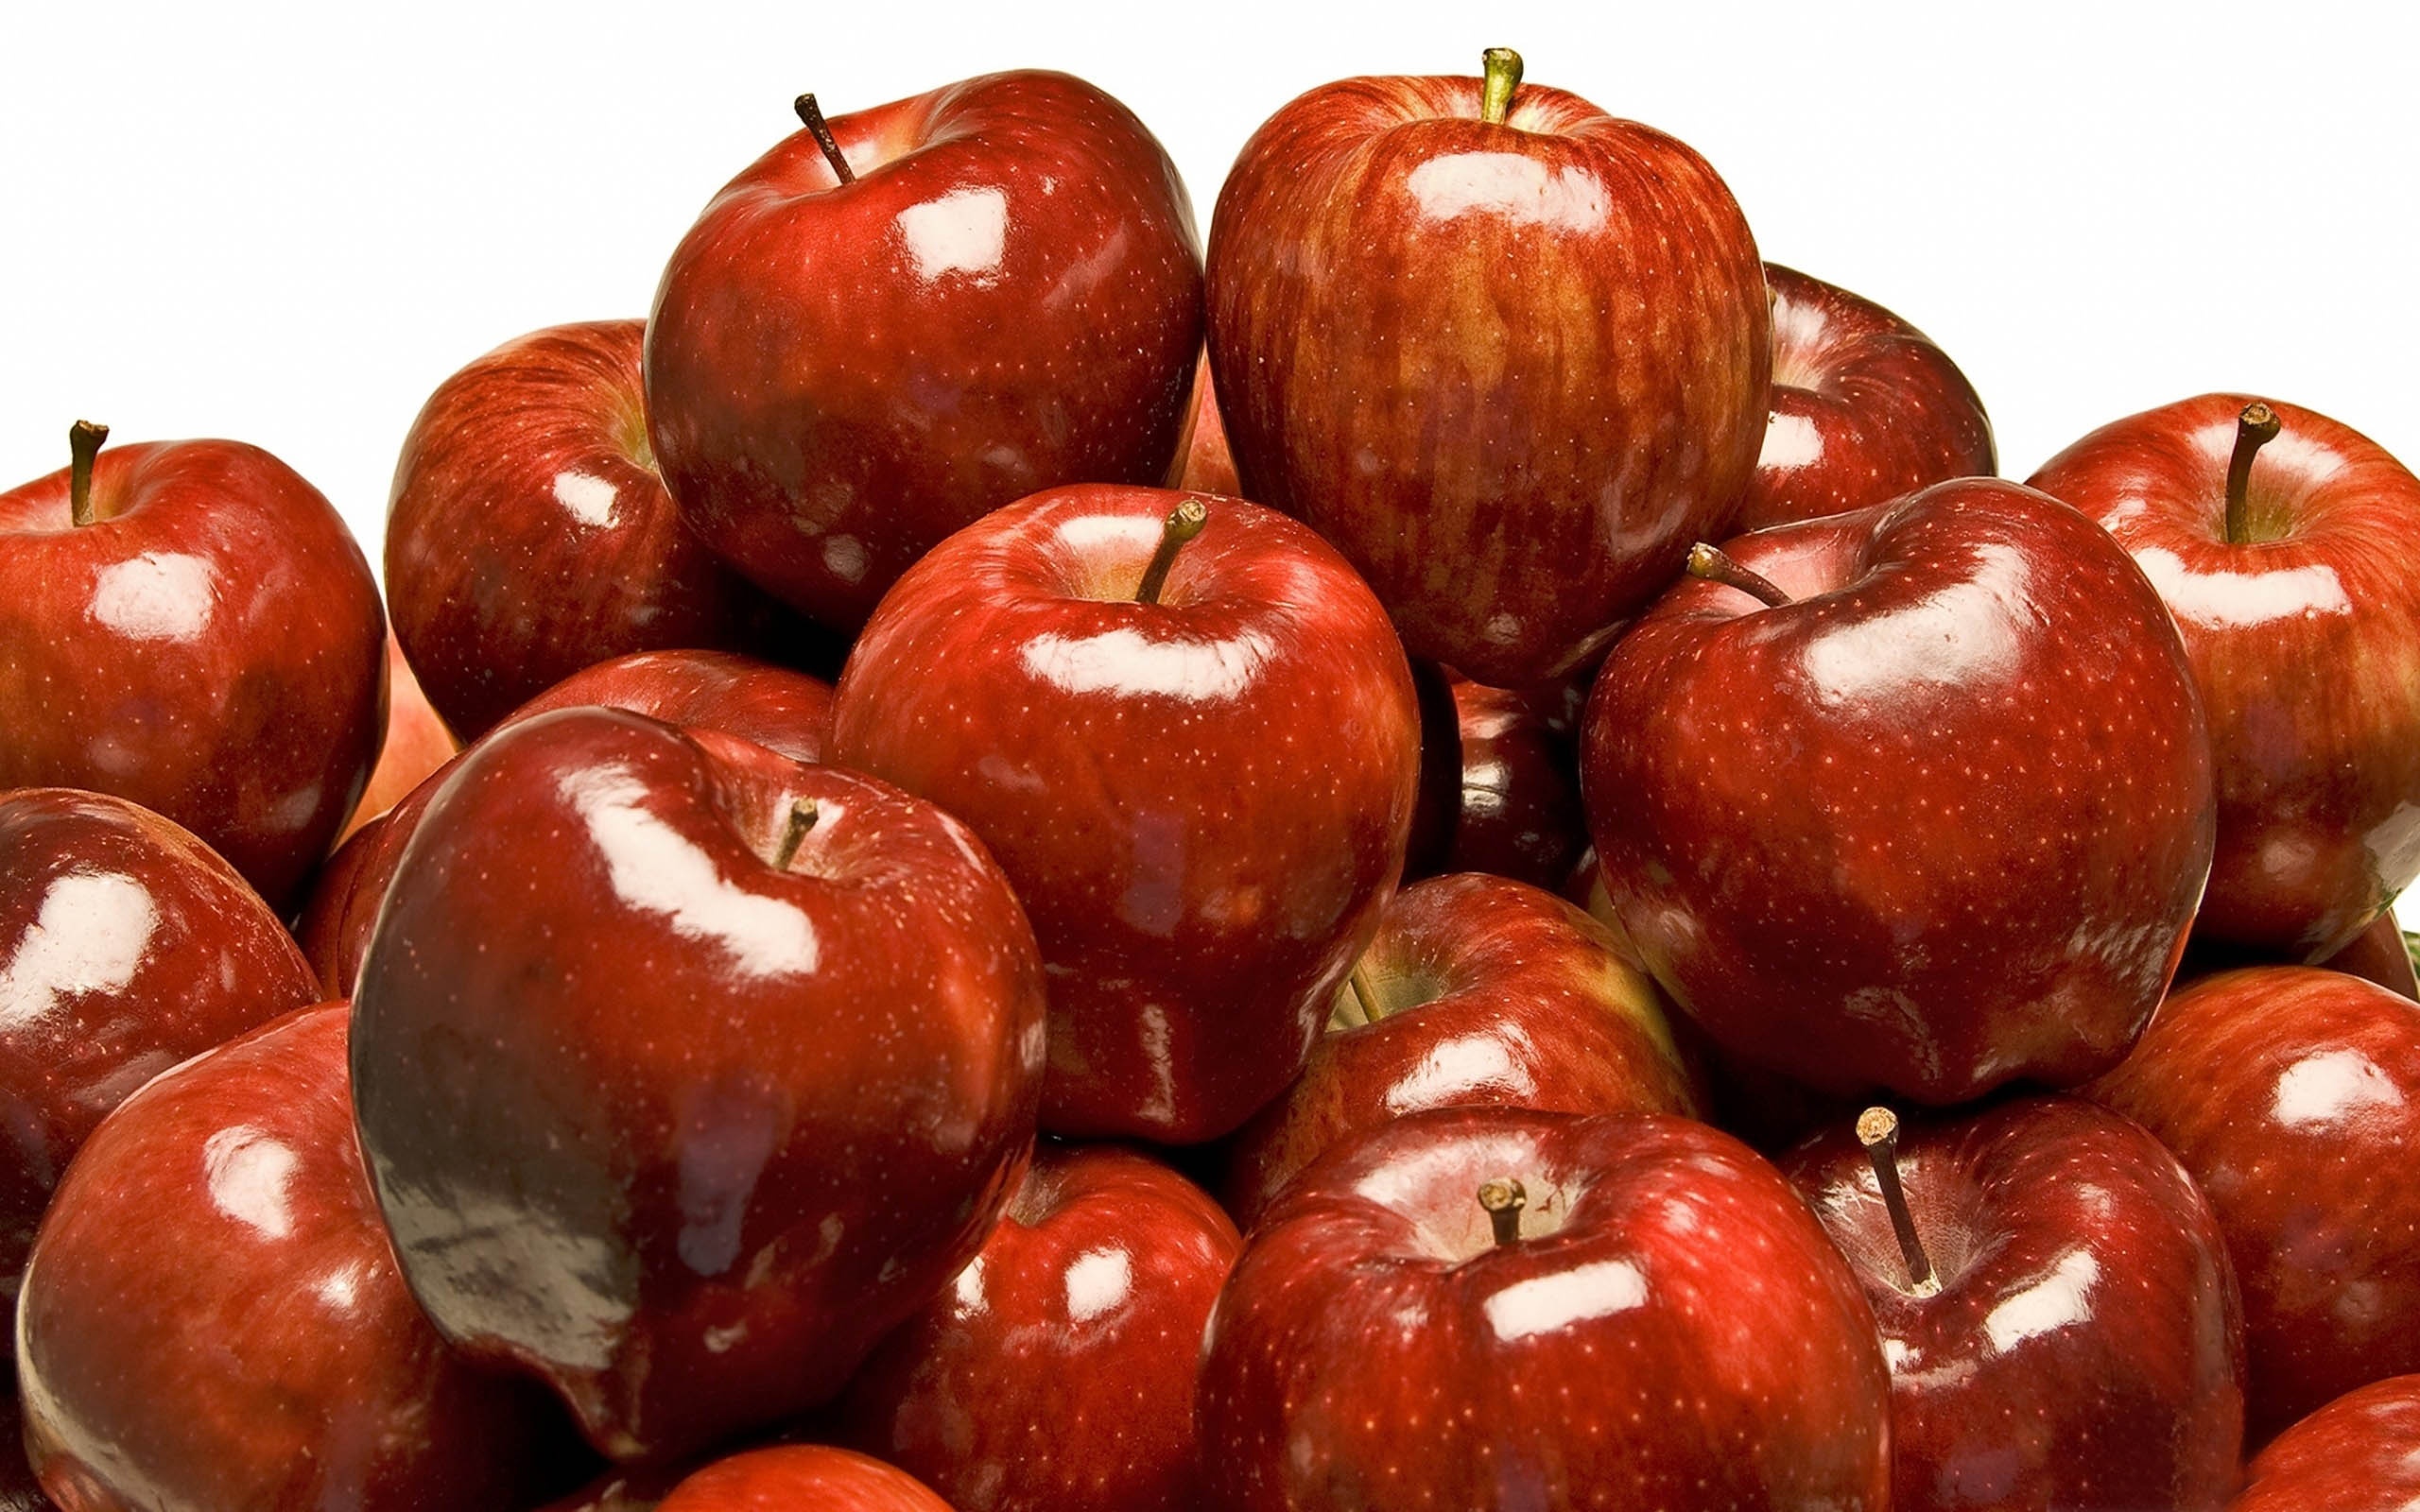 Shiny Red Apples